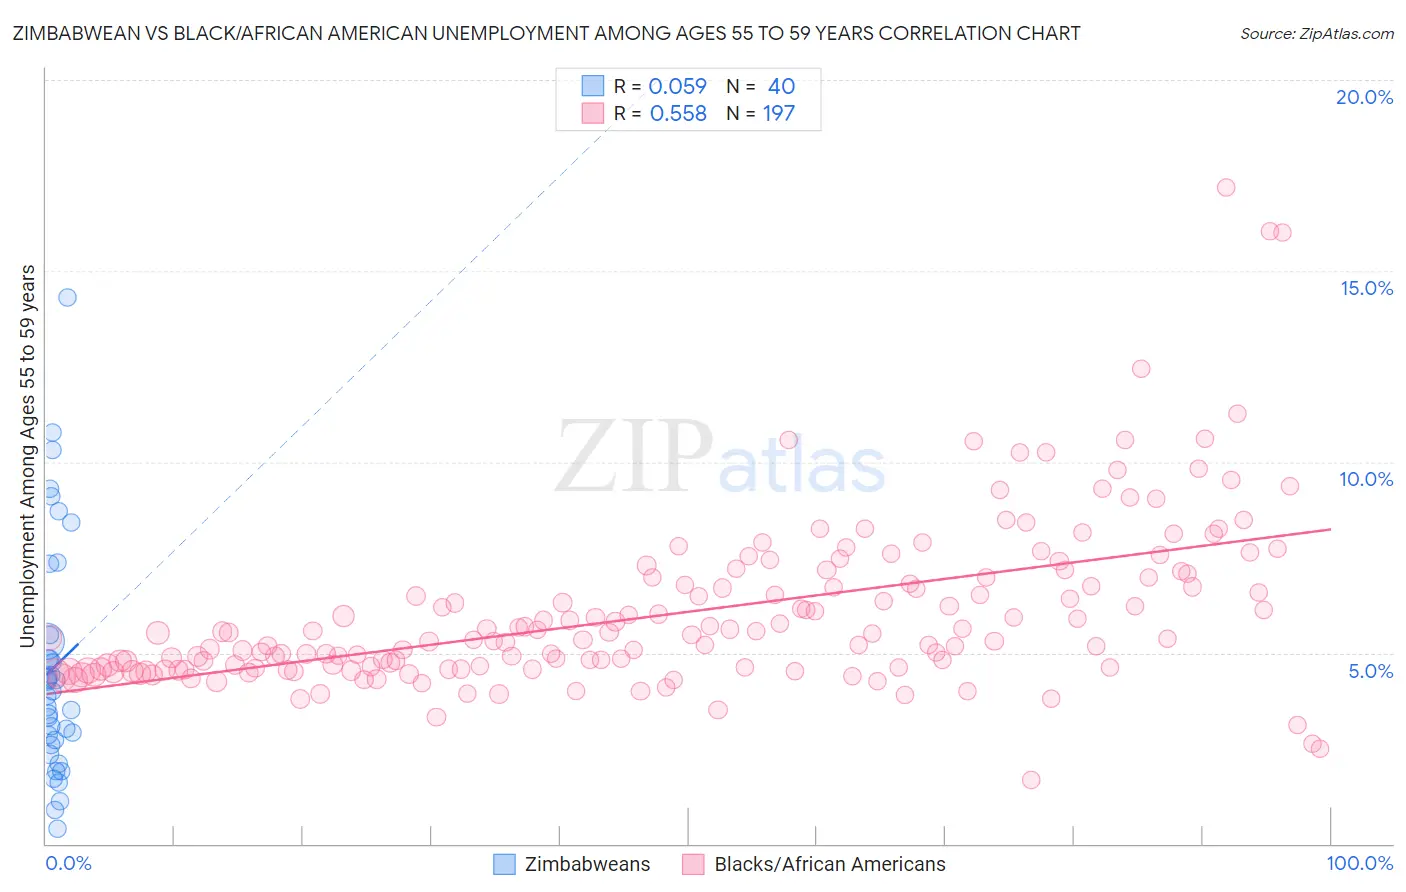 Zimbabwean vs Black/African American Unemployment Among Ages 55 to 59 years